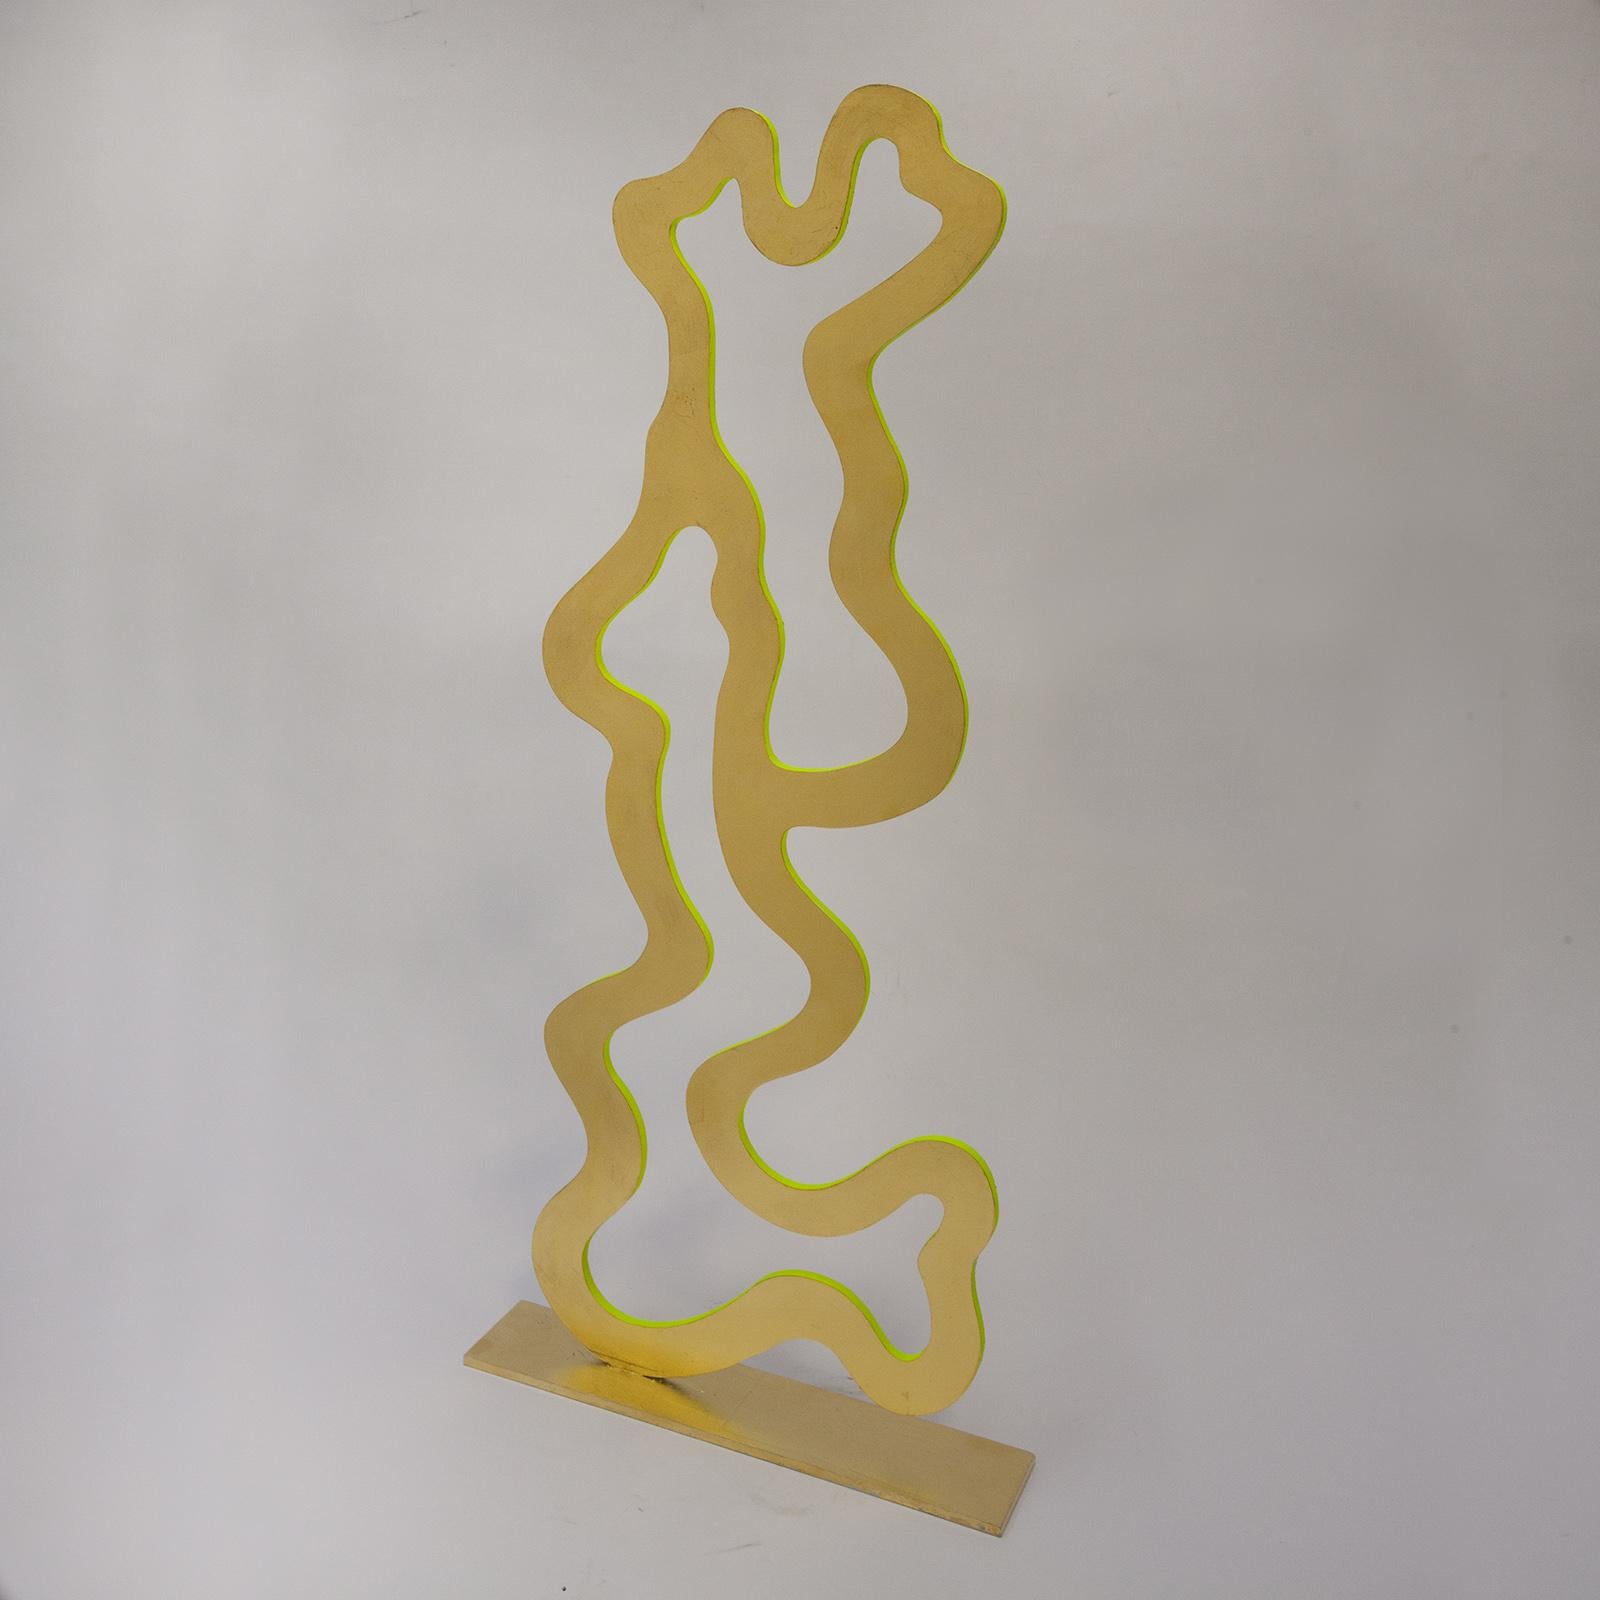 Yolanda & H Abstract Sculpture - standing sculpture covered with 24K gold leaf, inspired by coral shape